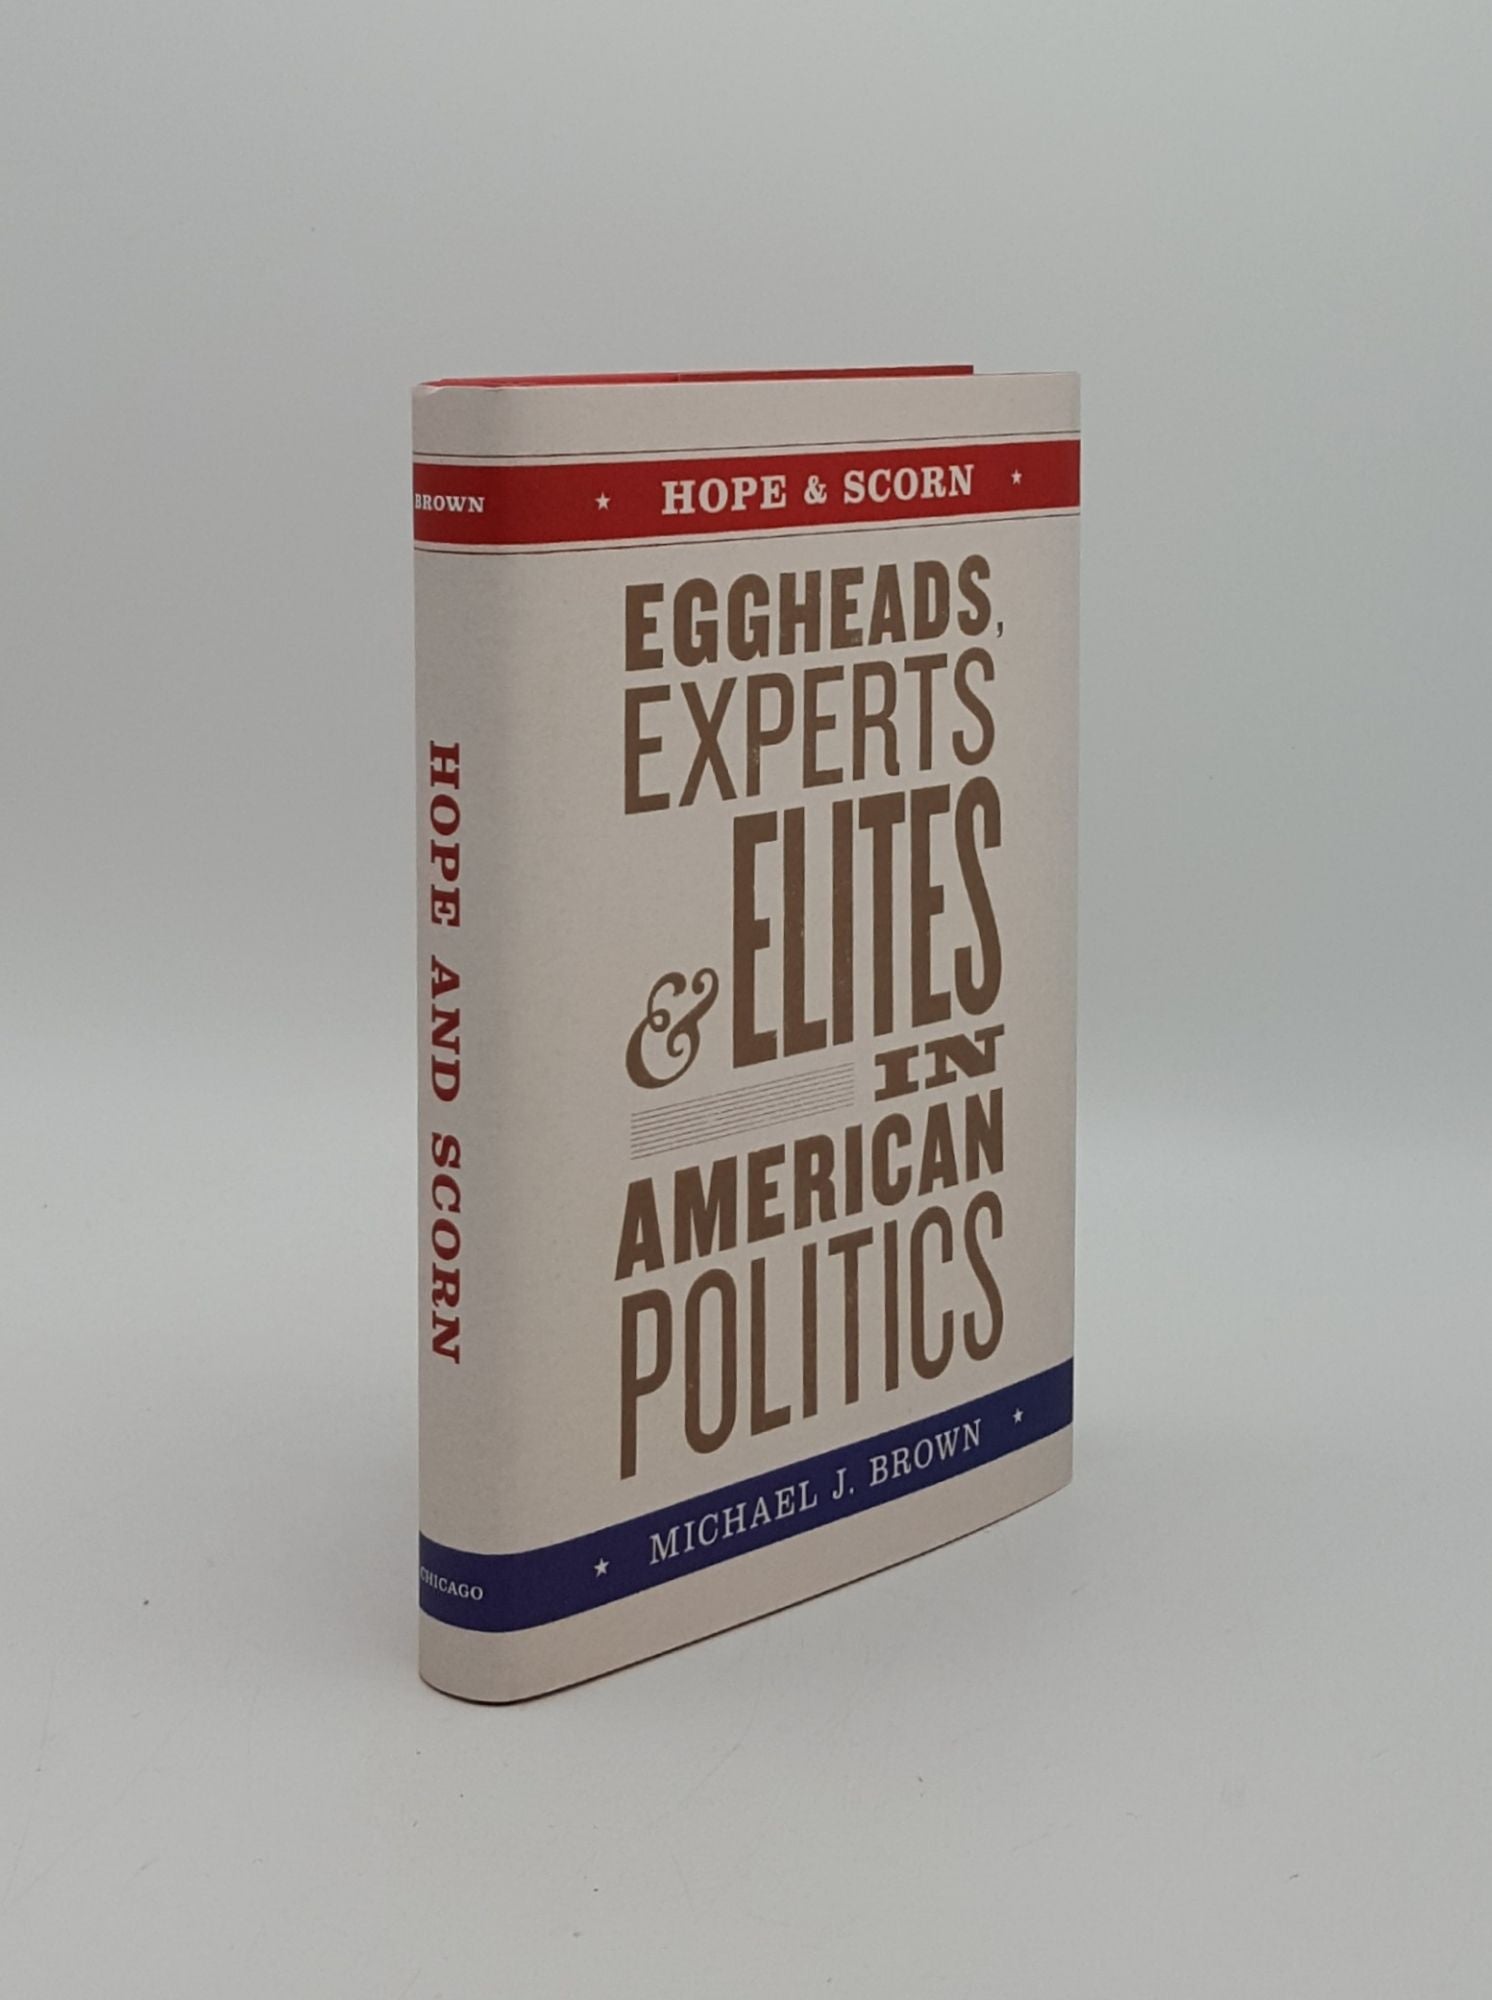 BROWN Michael J. - Hope and Scorn Eggheads Experts and Elites in American Politics